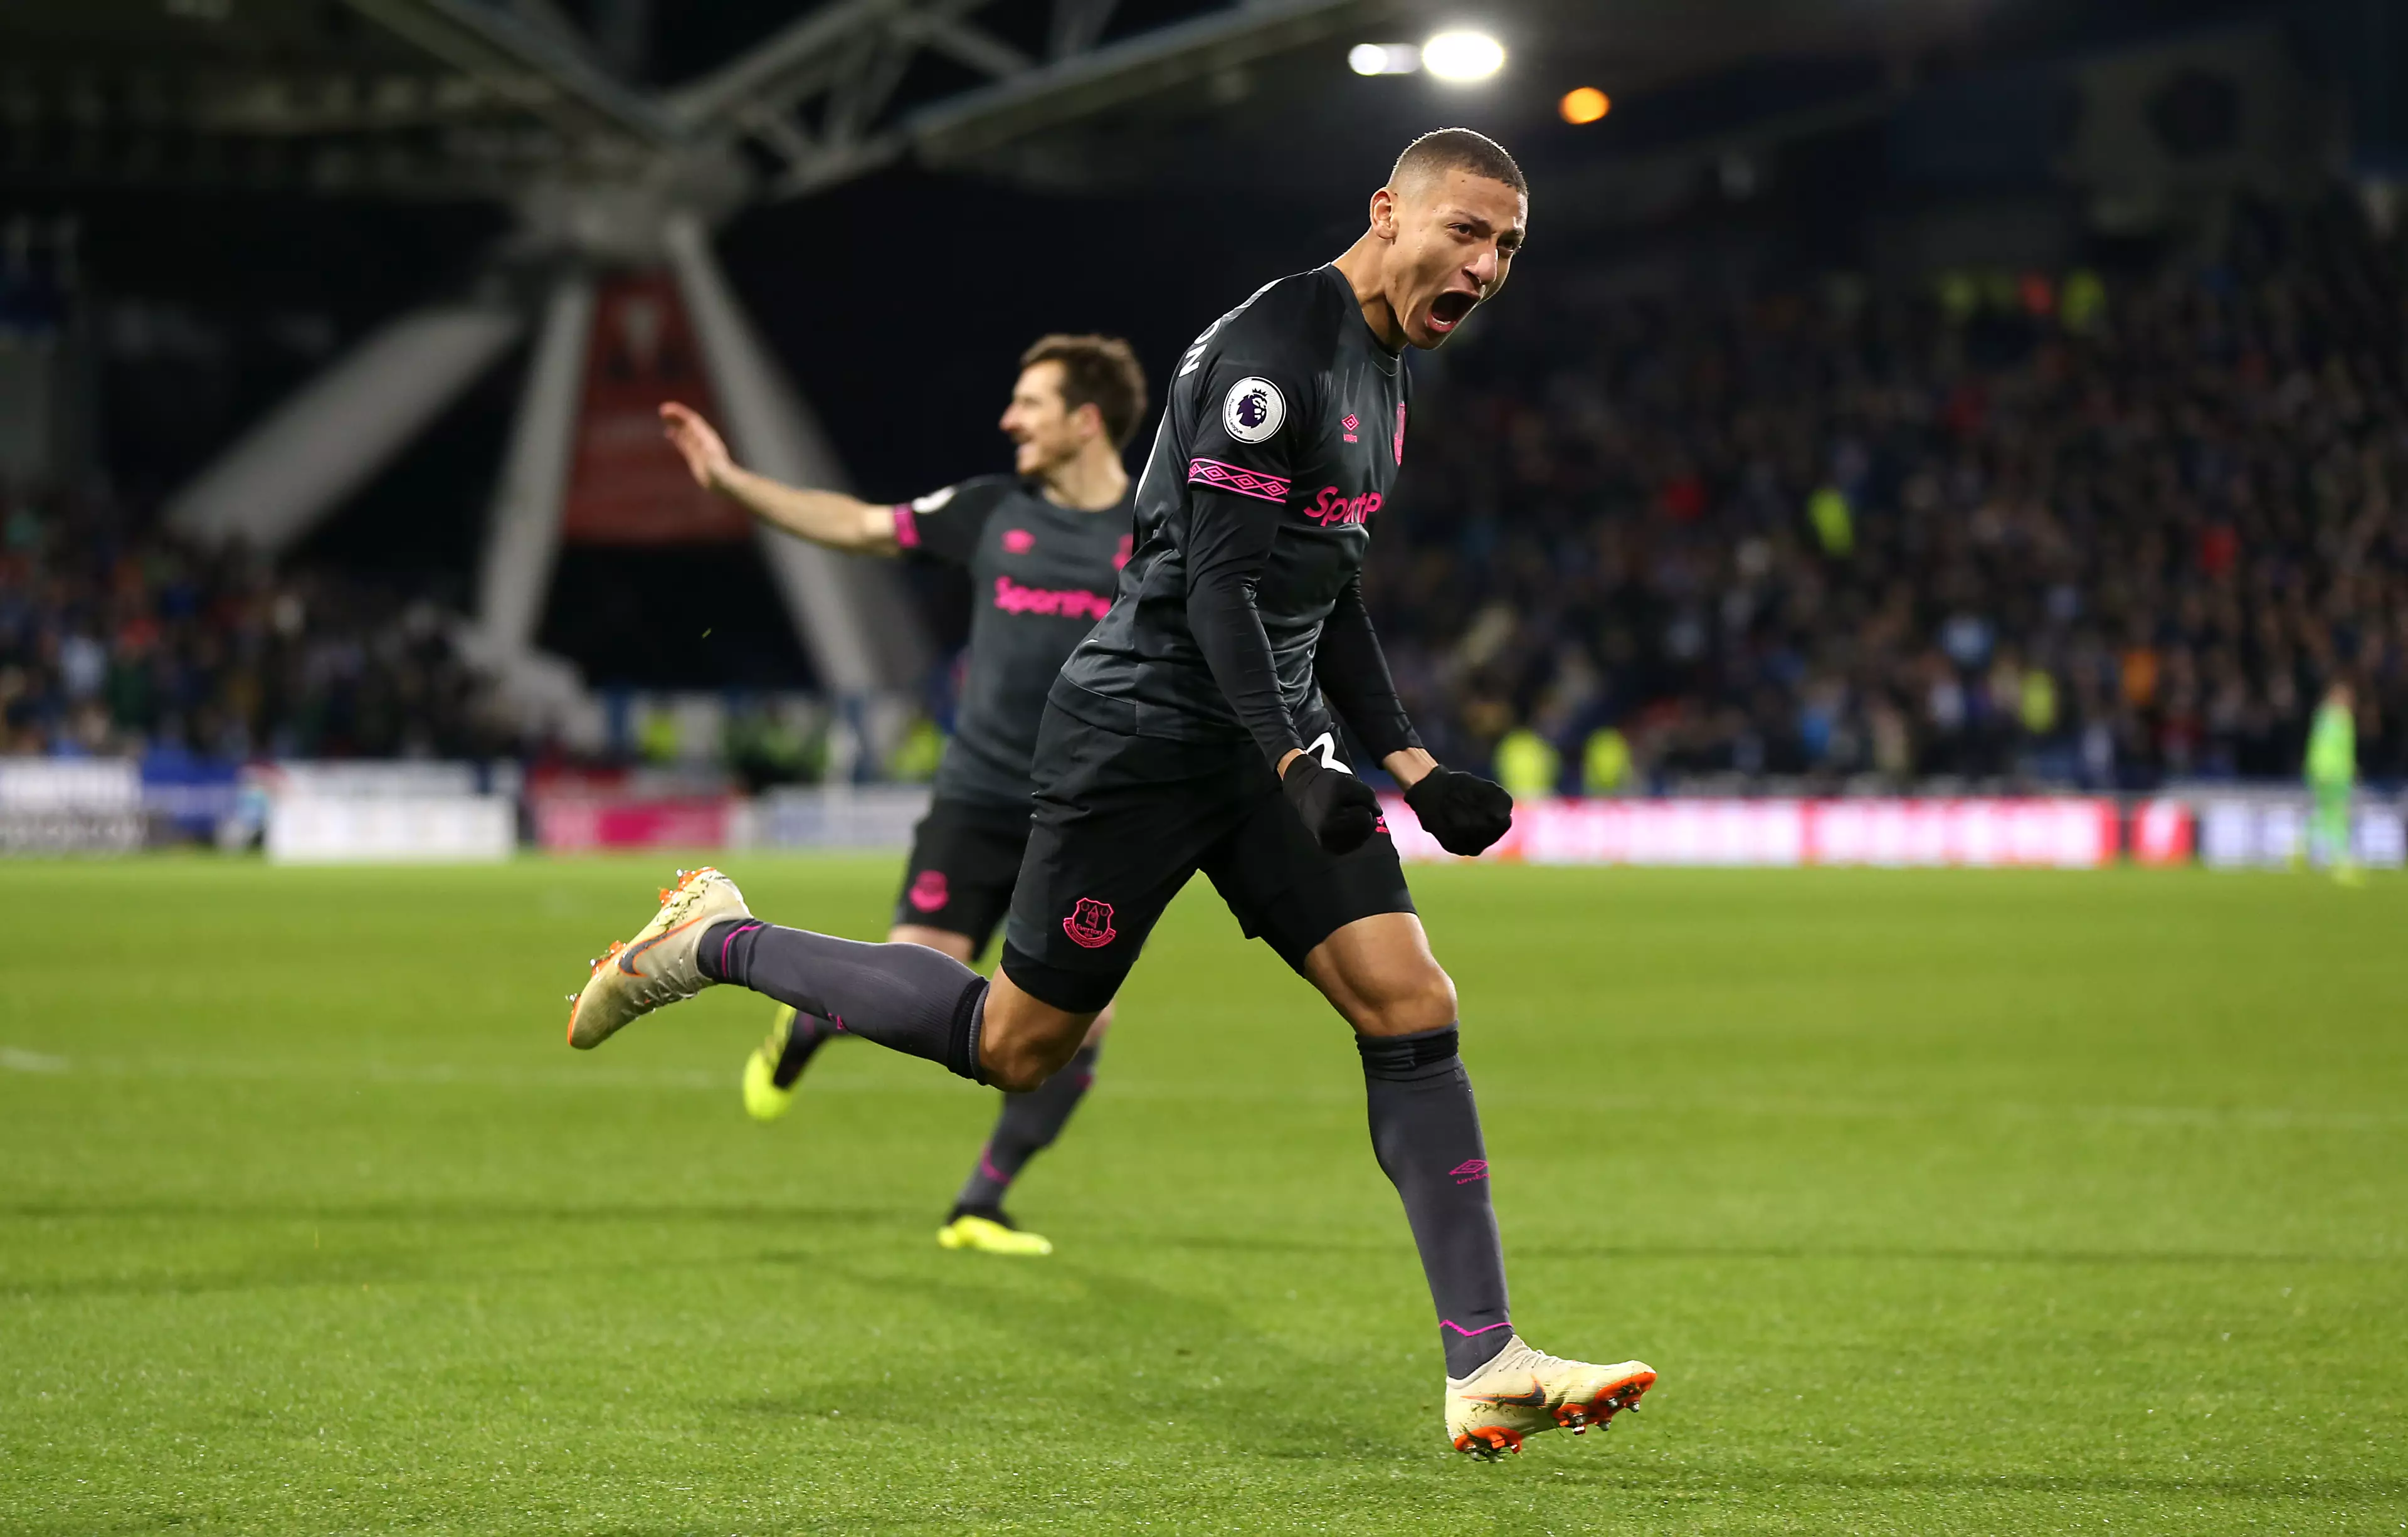 Despite his team's poor form Richarlison has been excellent again this season. Image: PA Images